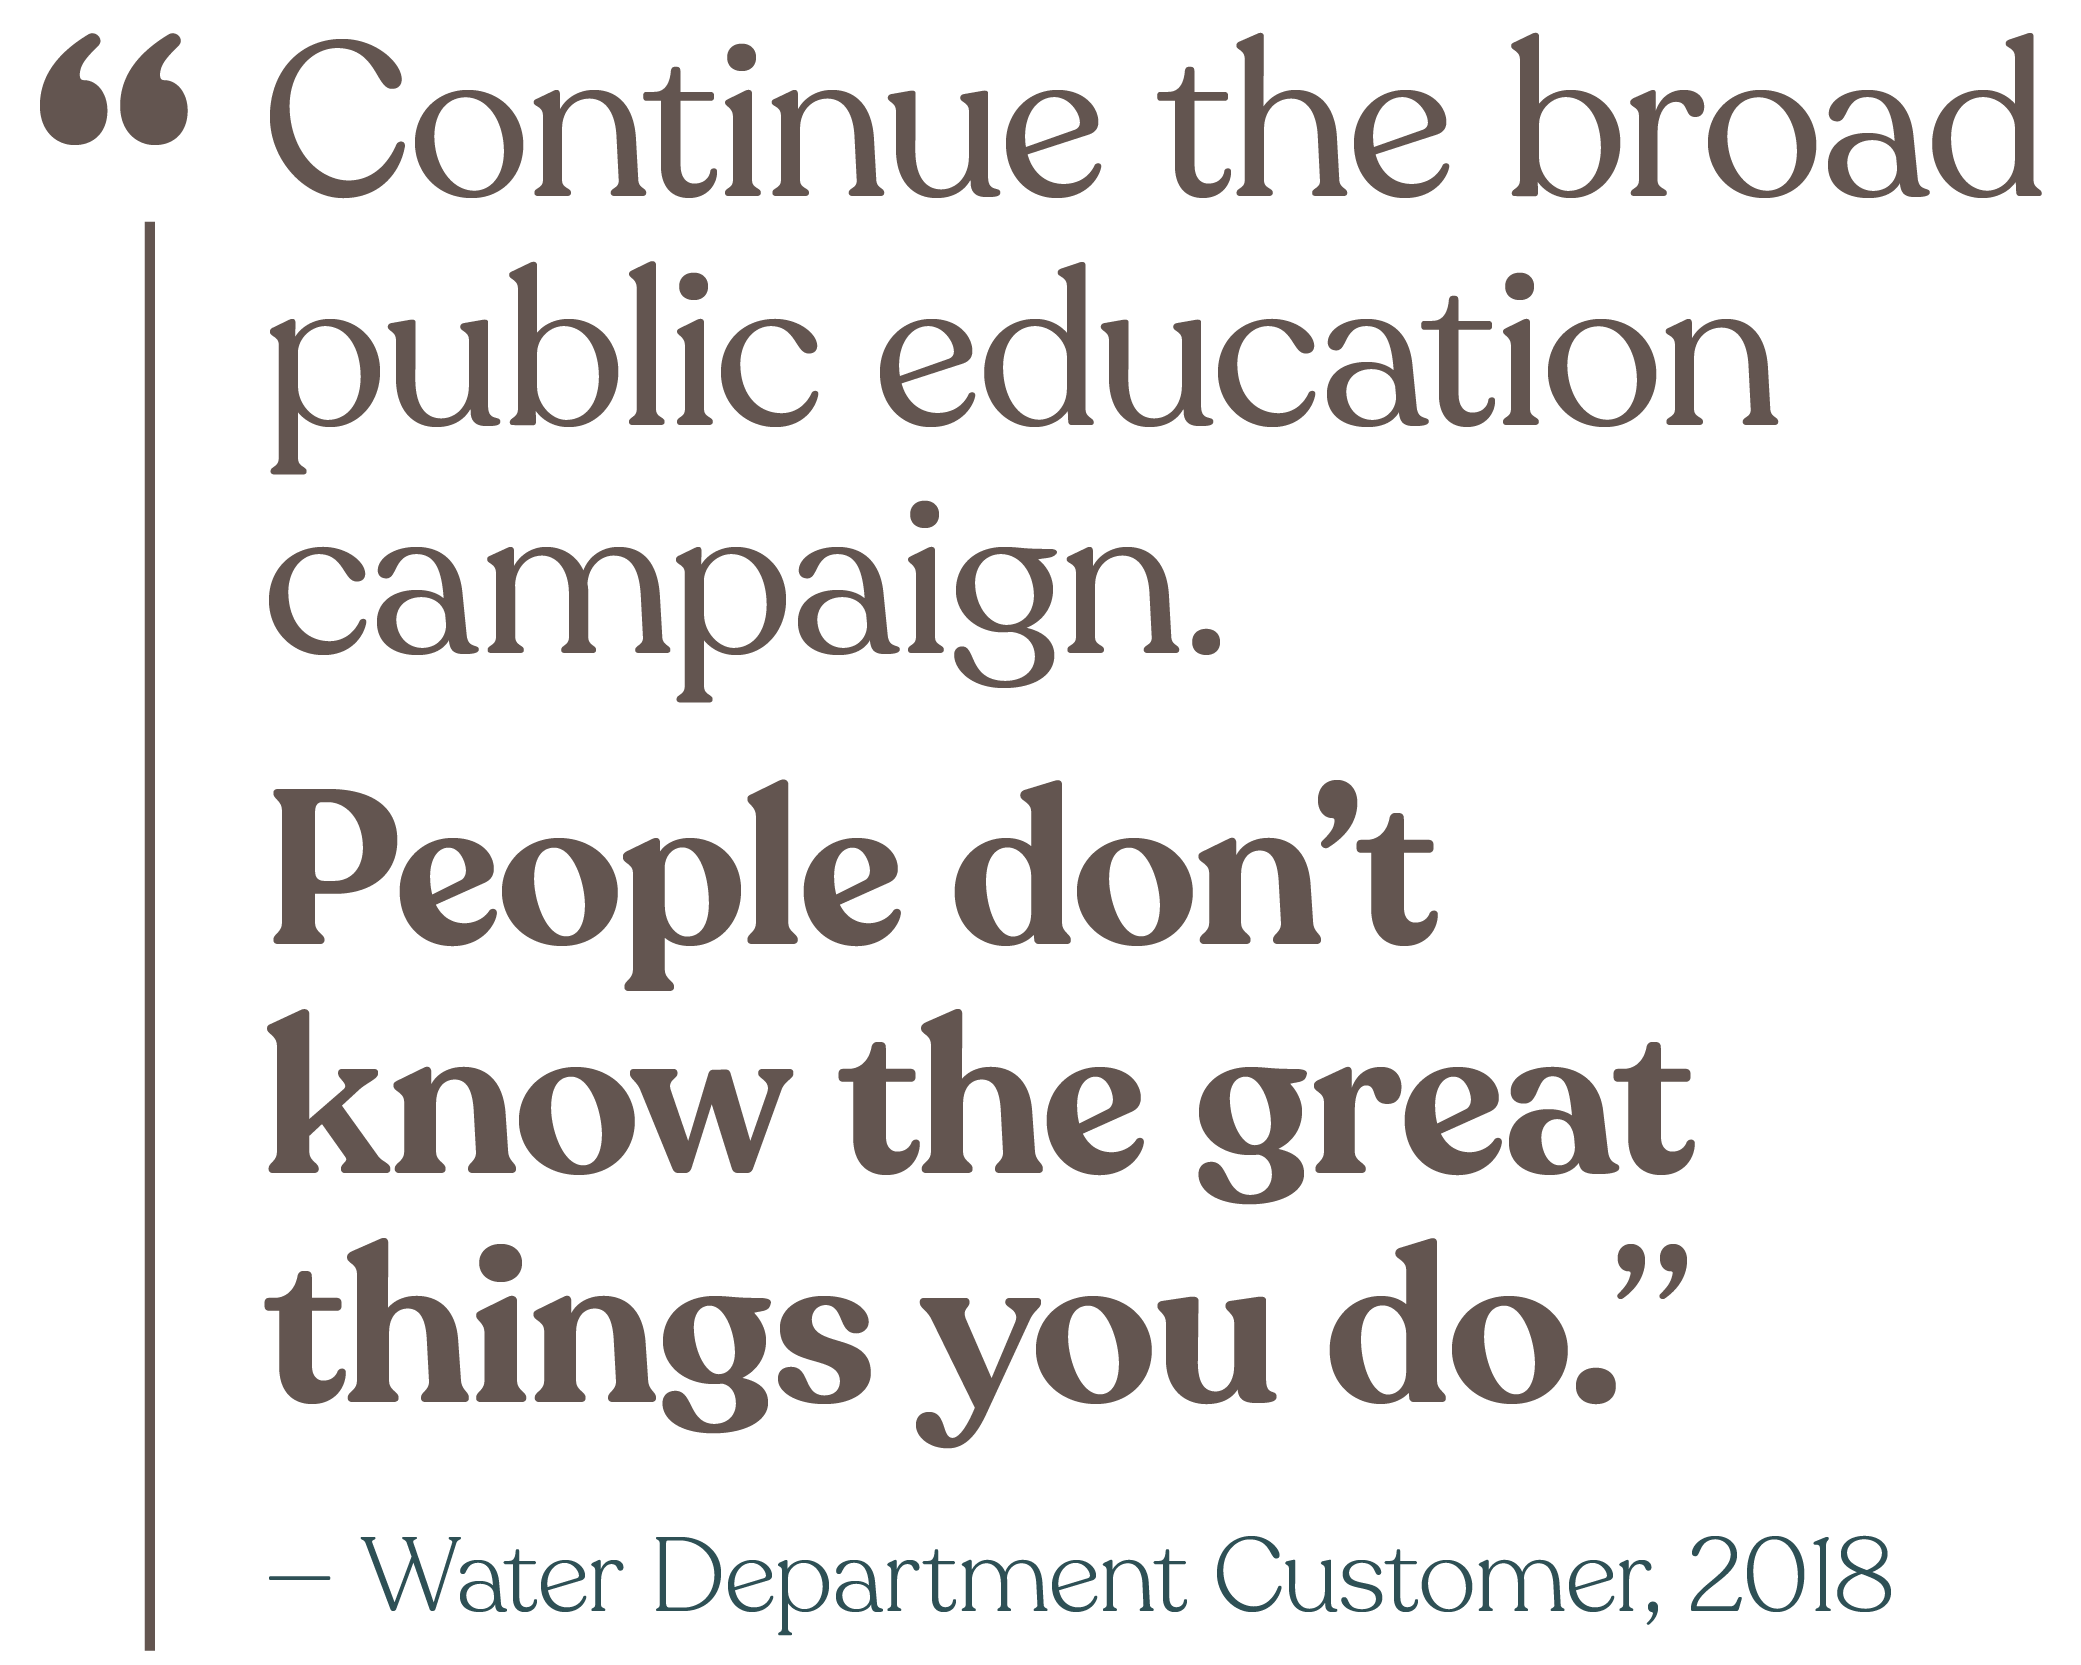 Continue the broad public education campaign. People don't know the great things you do. (from a Water Department Customer in 2018)